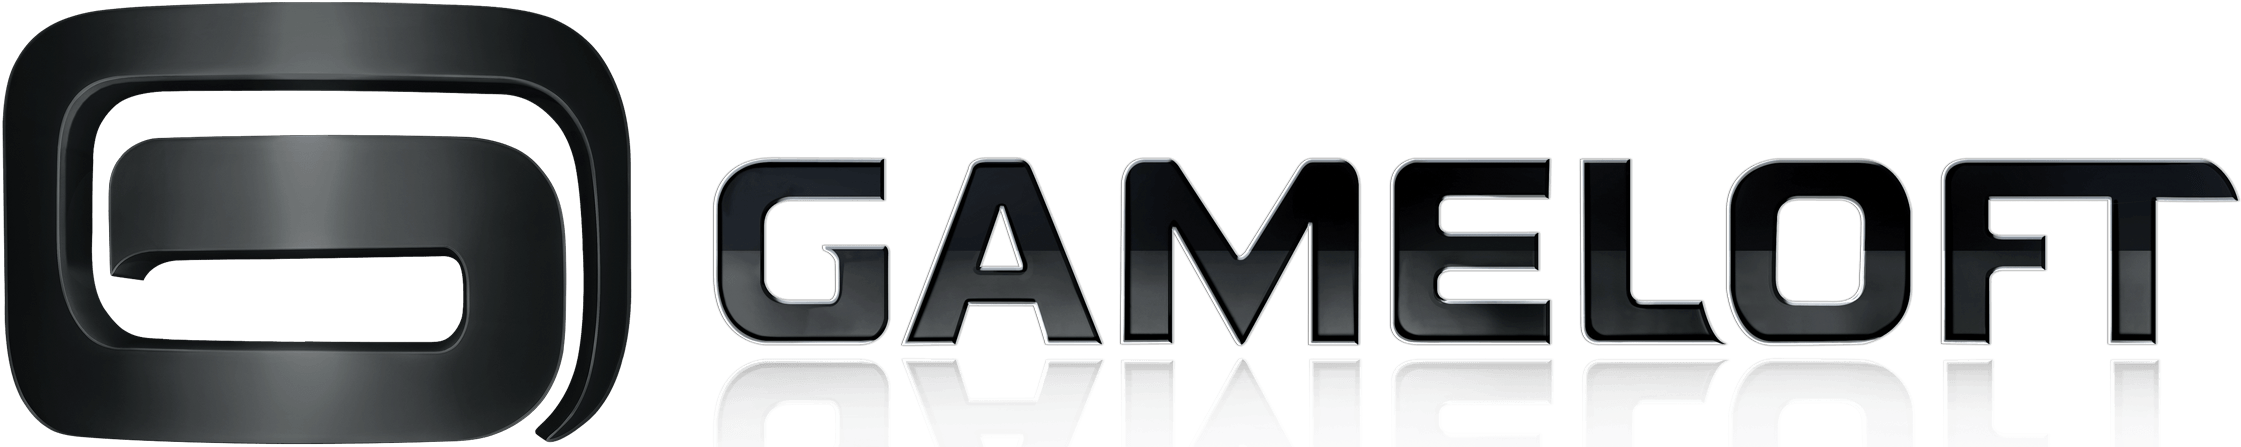 Gameloft Logo - File:Gameloft-logo-and-wordmark.png - Wikimedia Commons